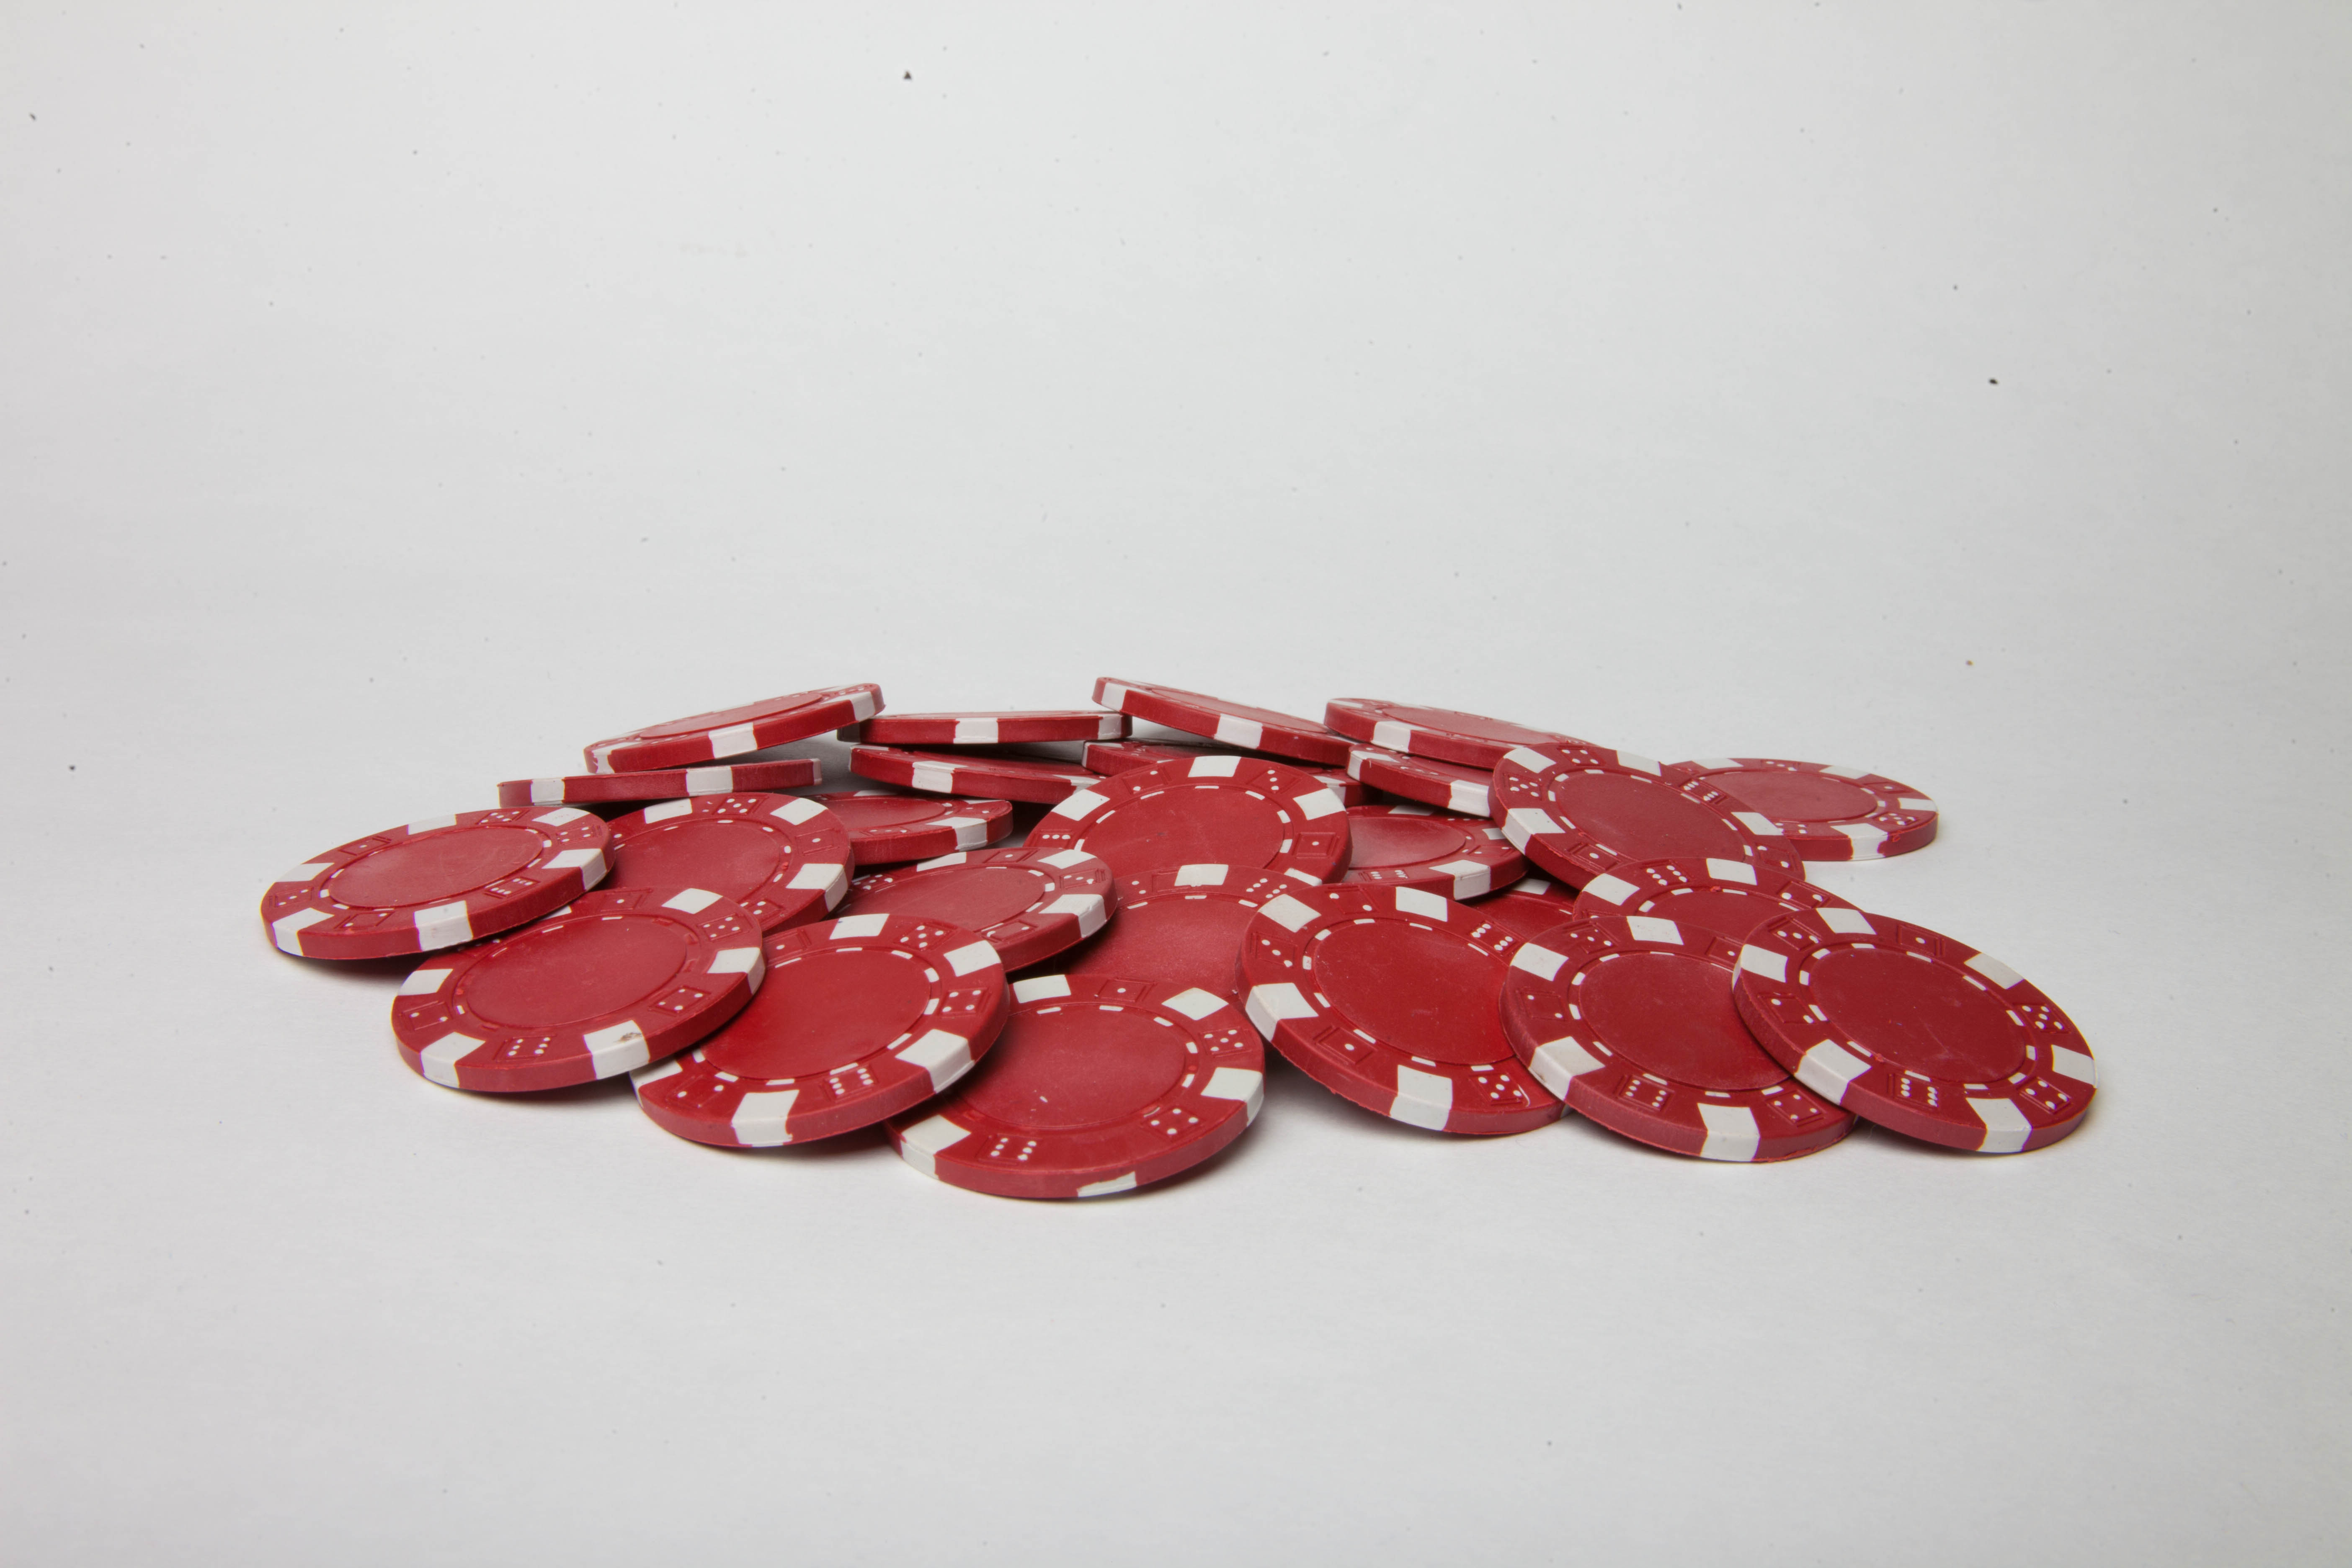 Red poker chips on white background, Addiction, Bet, Chips, Gamble, HQ Photo